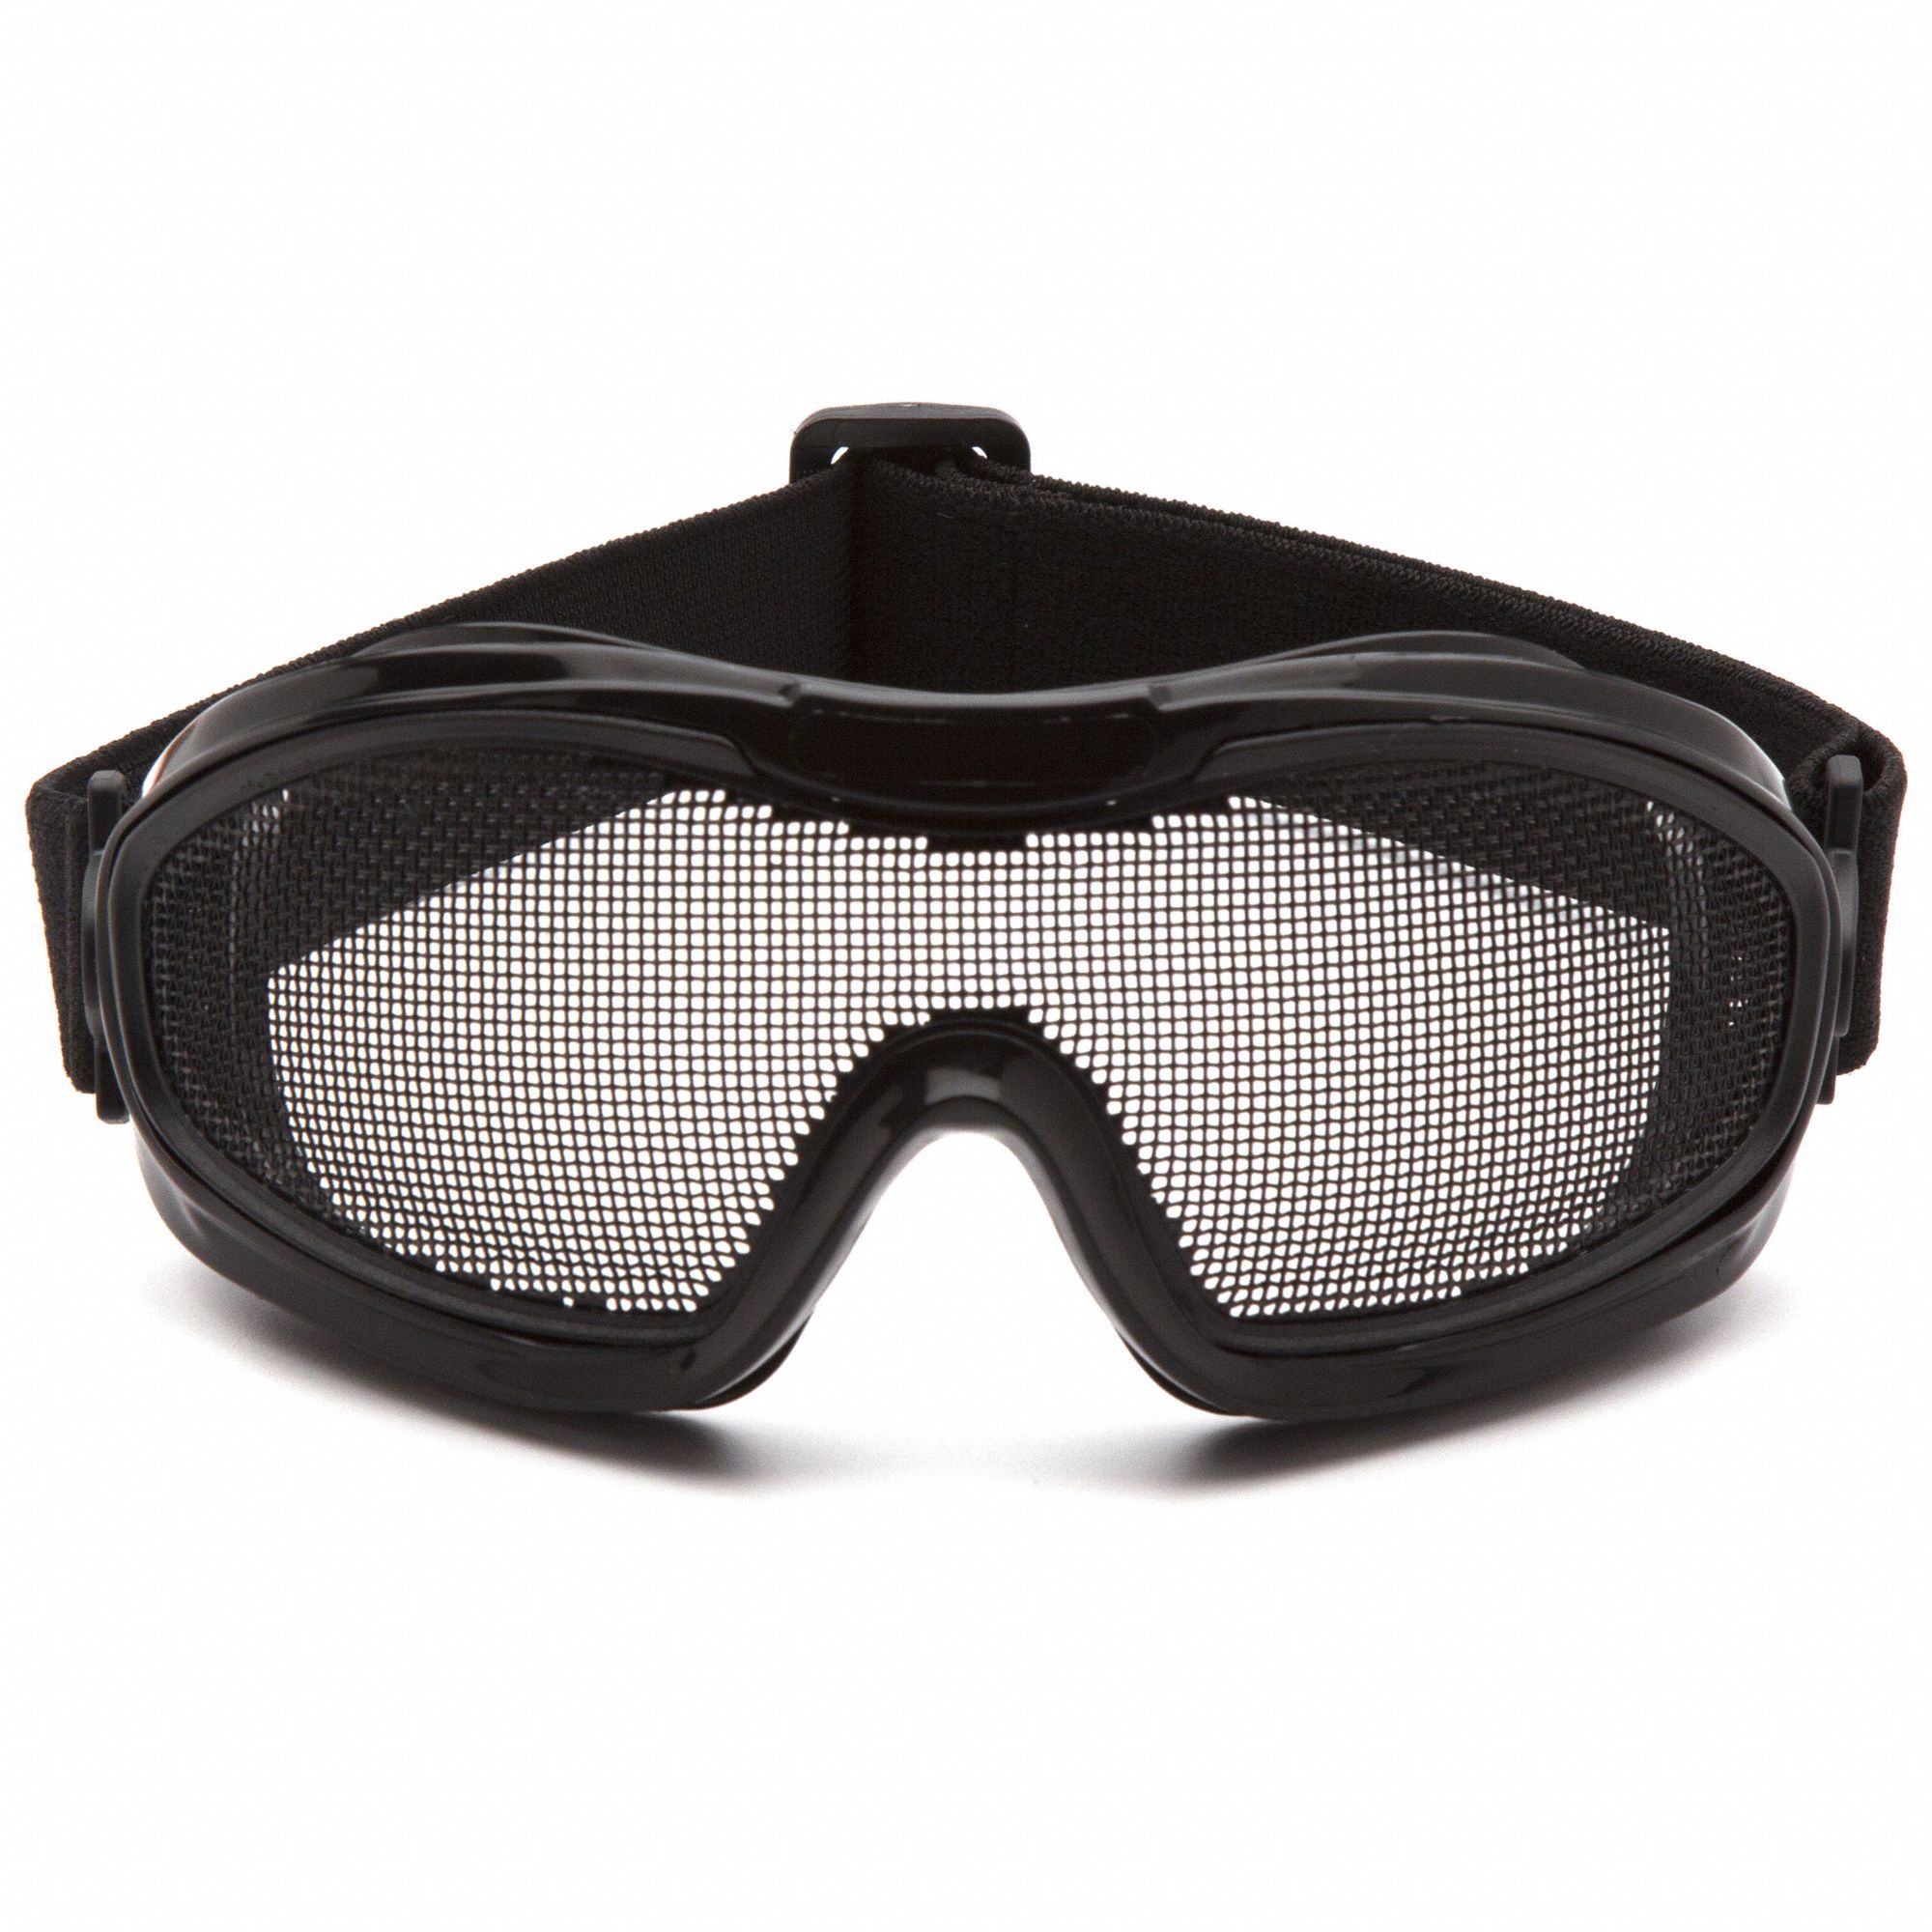 SAFETY GOGGLES, OTG, PVC/STEEL MESH, ELECTRODEPOSITED, BLACK/CLEAR, UNIVERSAL, UNISEX